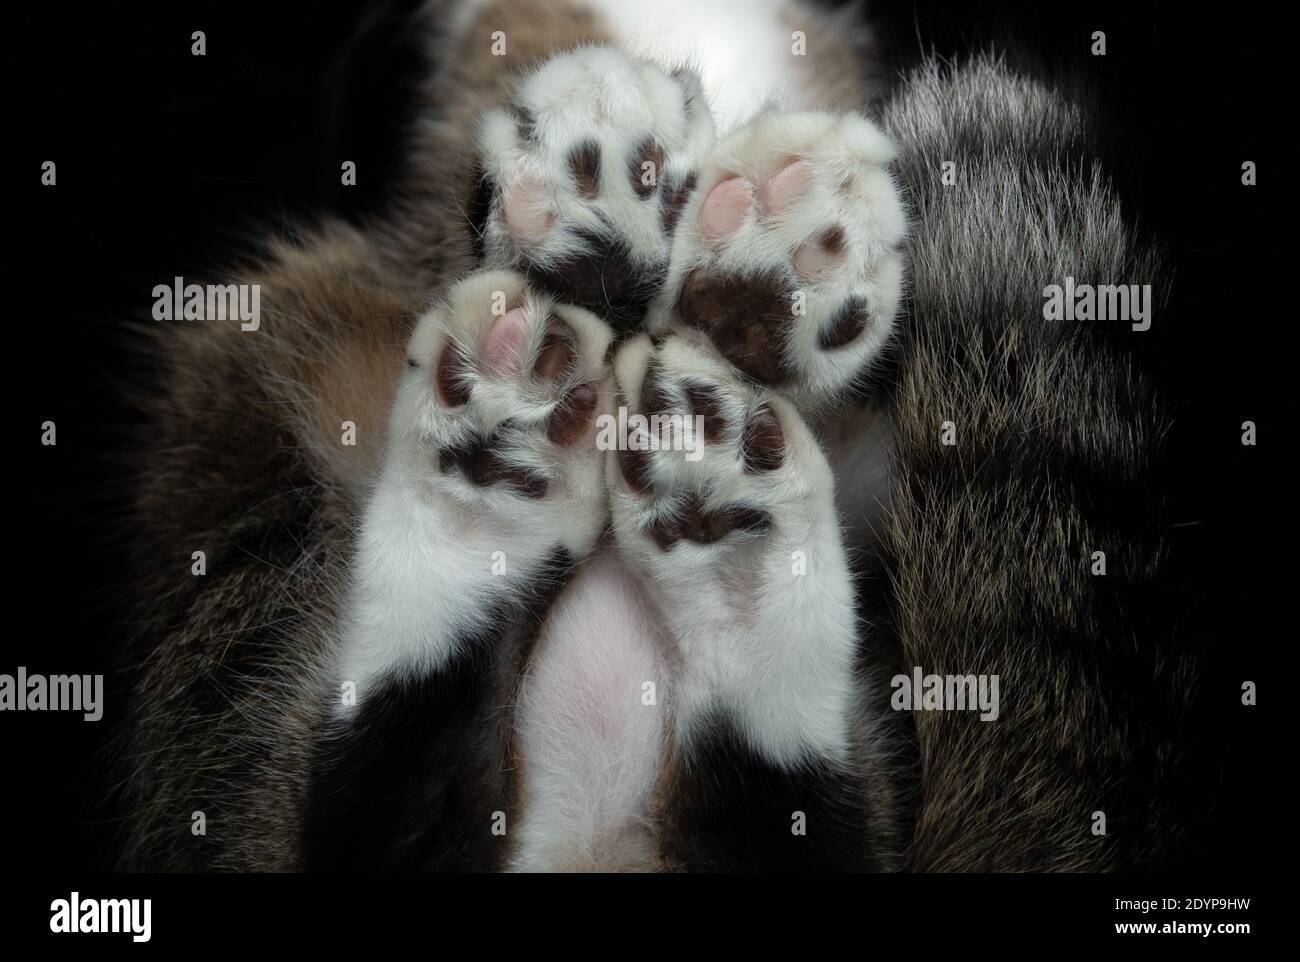 close up bottom view of a tabby white cat's paws. the cat is sitting on window glass in front of black background and has different colored toe beans Stock Photo